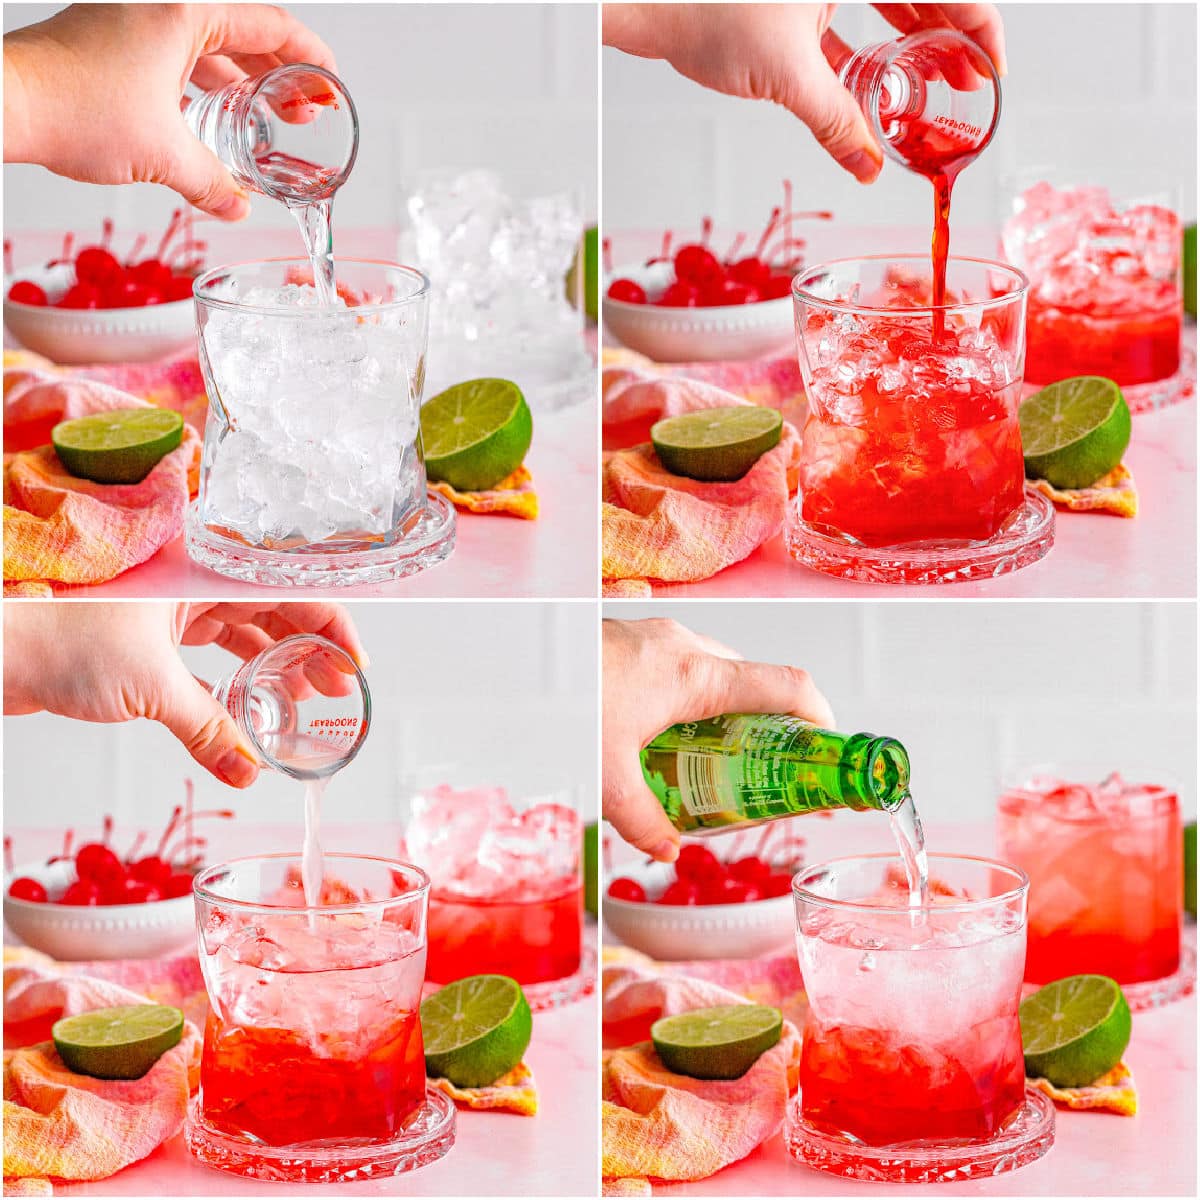 four image collage showing how to make a dirty shirley temple.